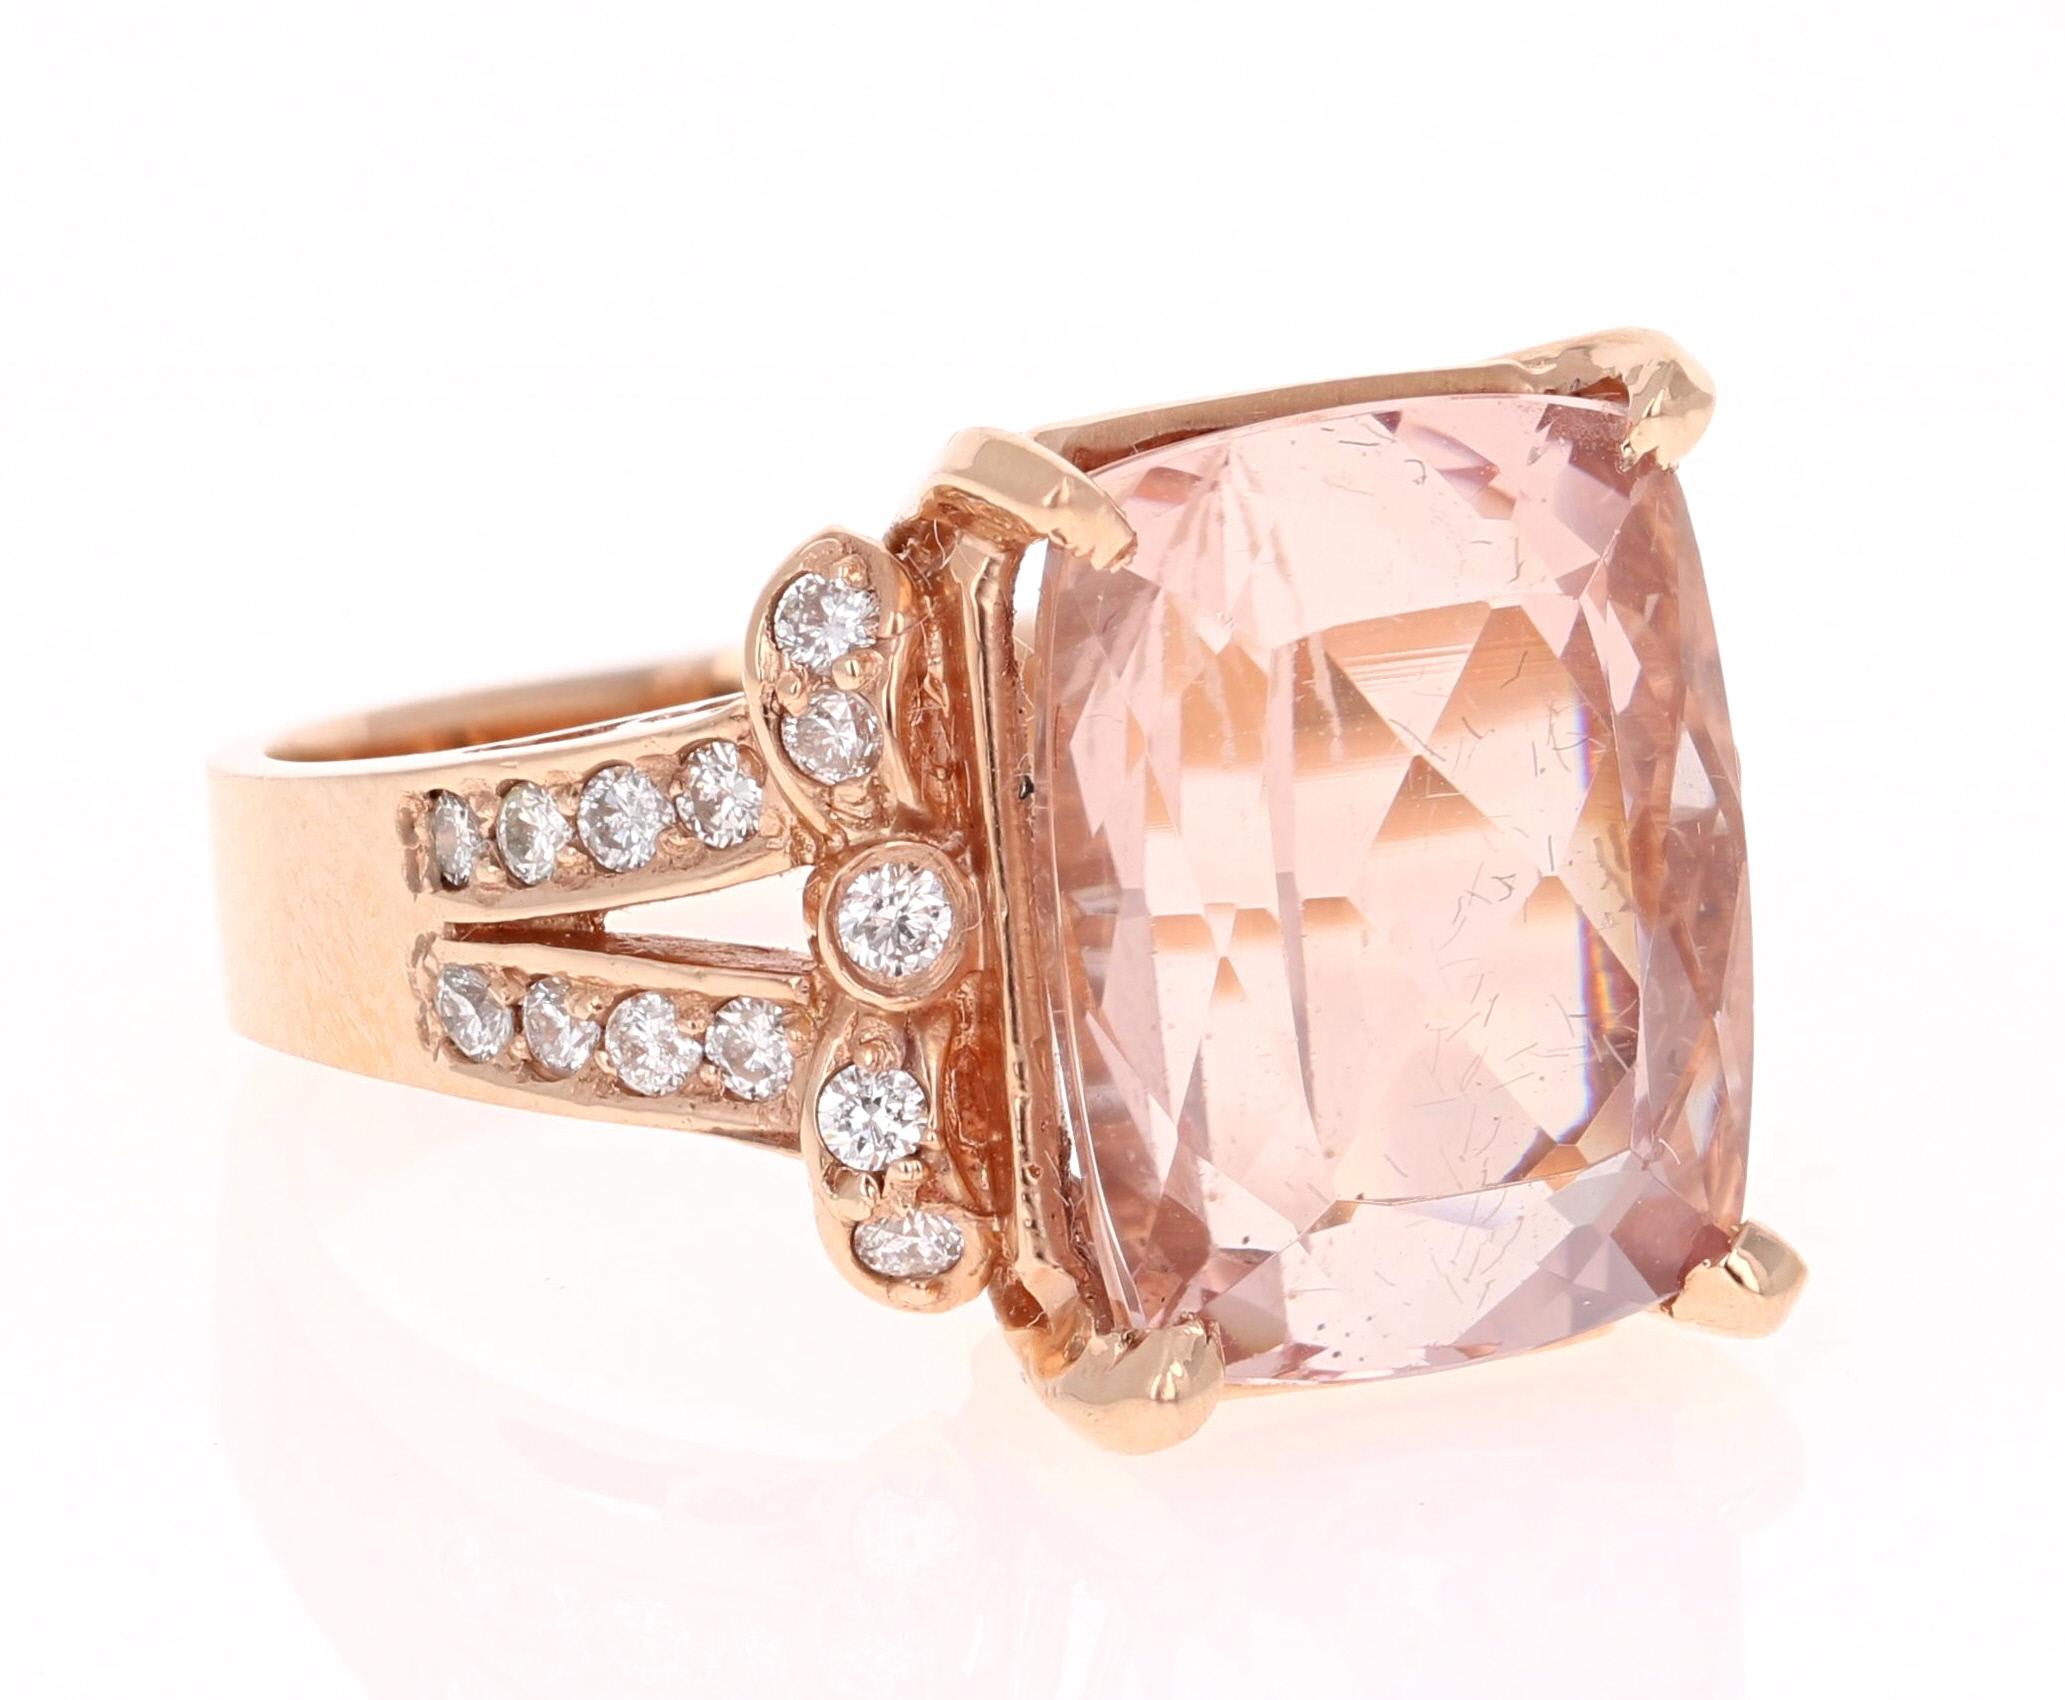 A Total Statement Piece!! This gorgeous, classy and large Morganite Ring has a 9.59 Carat Cushion Cut Morganite as its center and has 26 Round Cut Diamonds that weigh 0.59 carats. The clarity and color of the diamonds are SI-F. The total carat